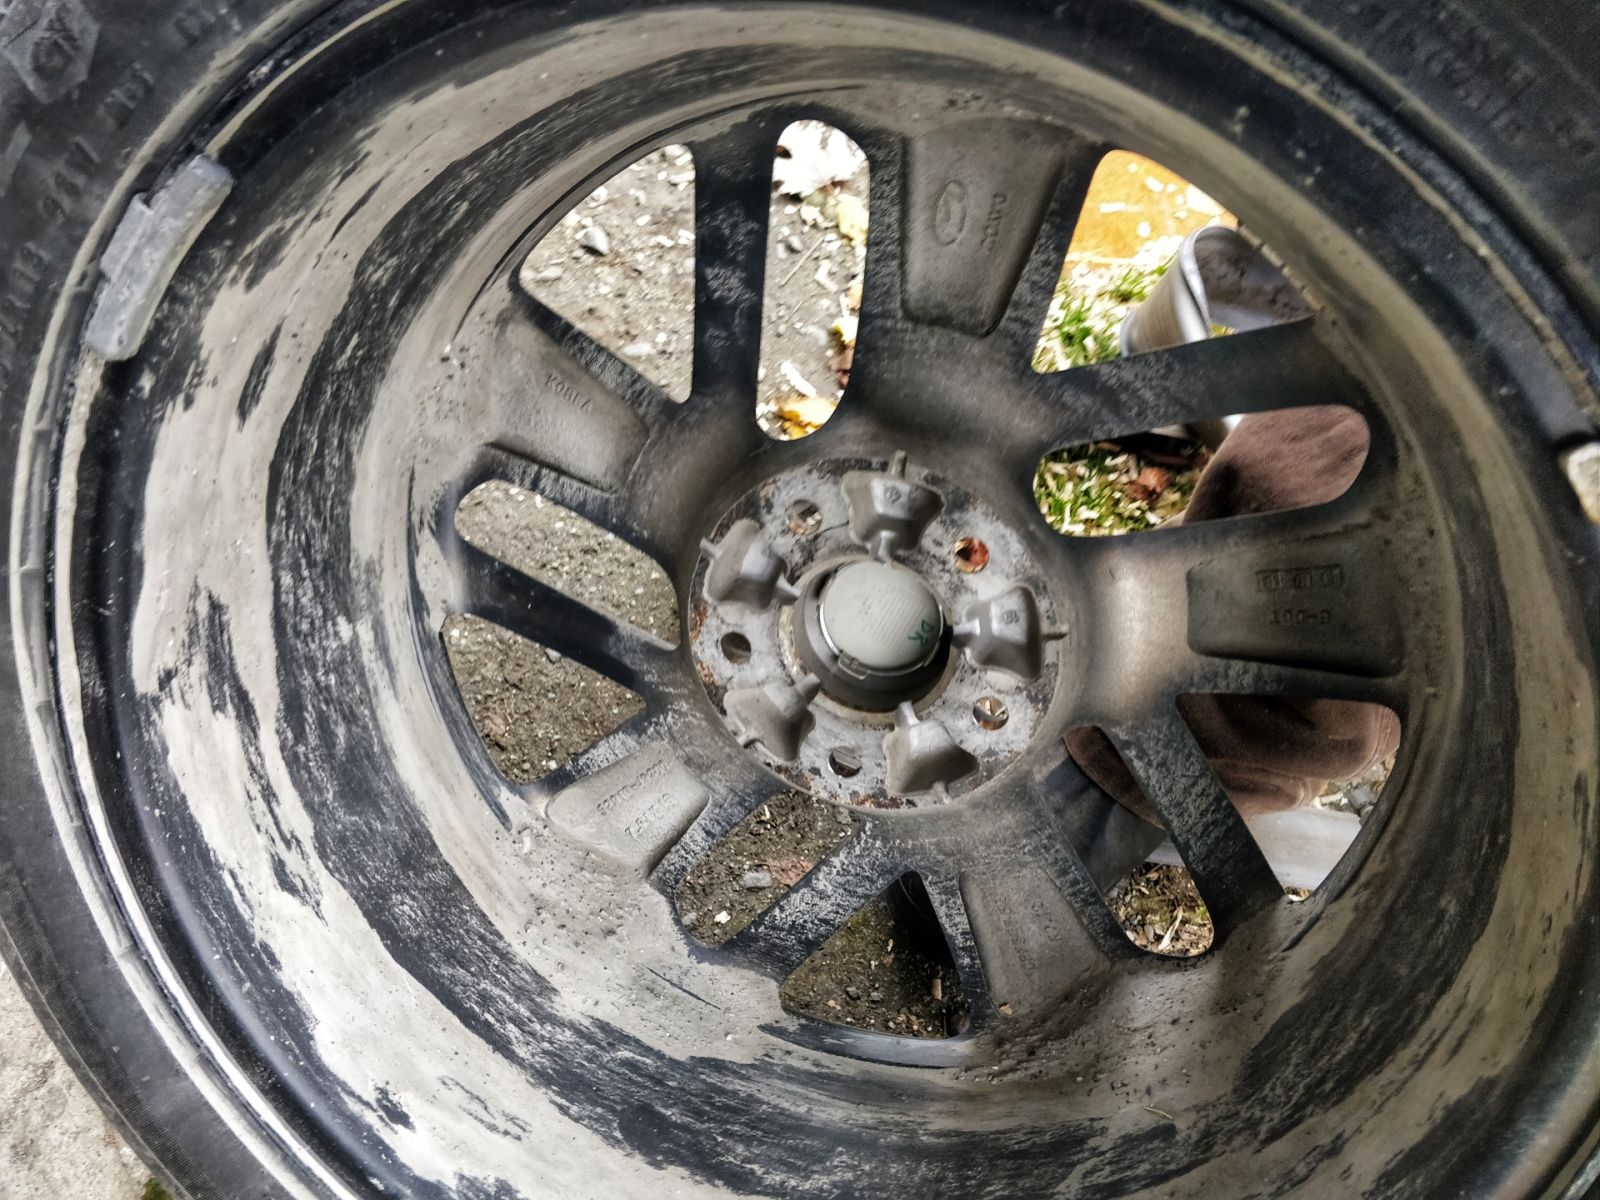 A clear illustration of why the Hyundai factory wheels become unbalanced in the winter. The spoke design is just almost impossible to clean behind. 